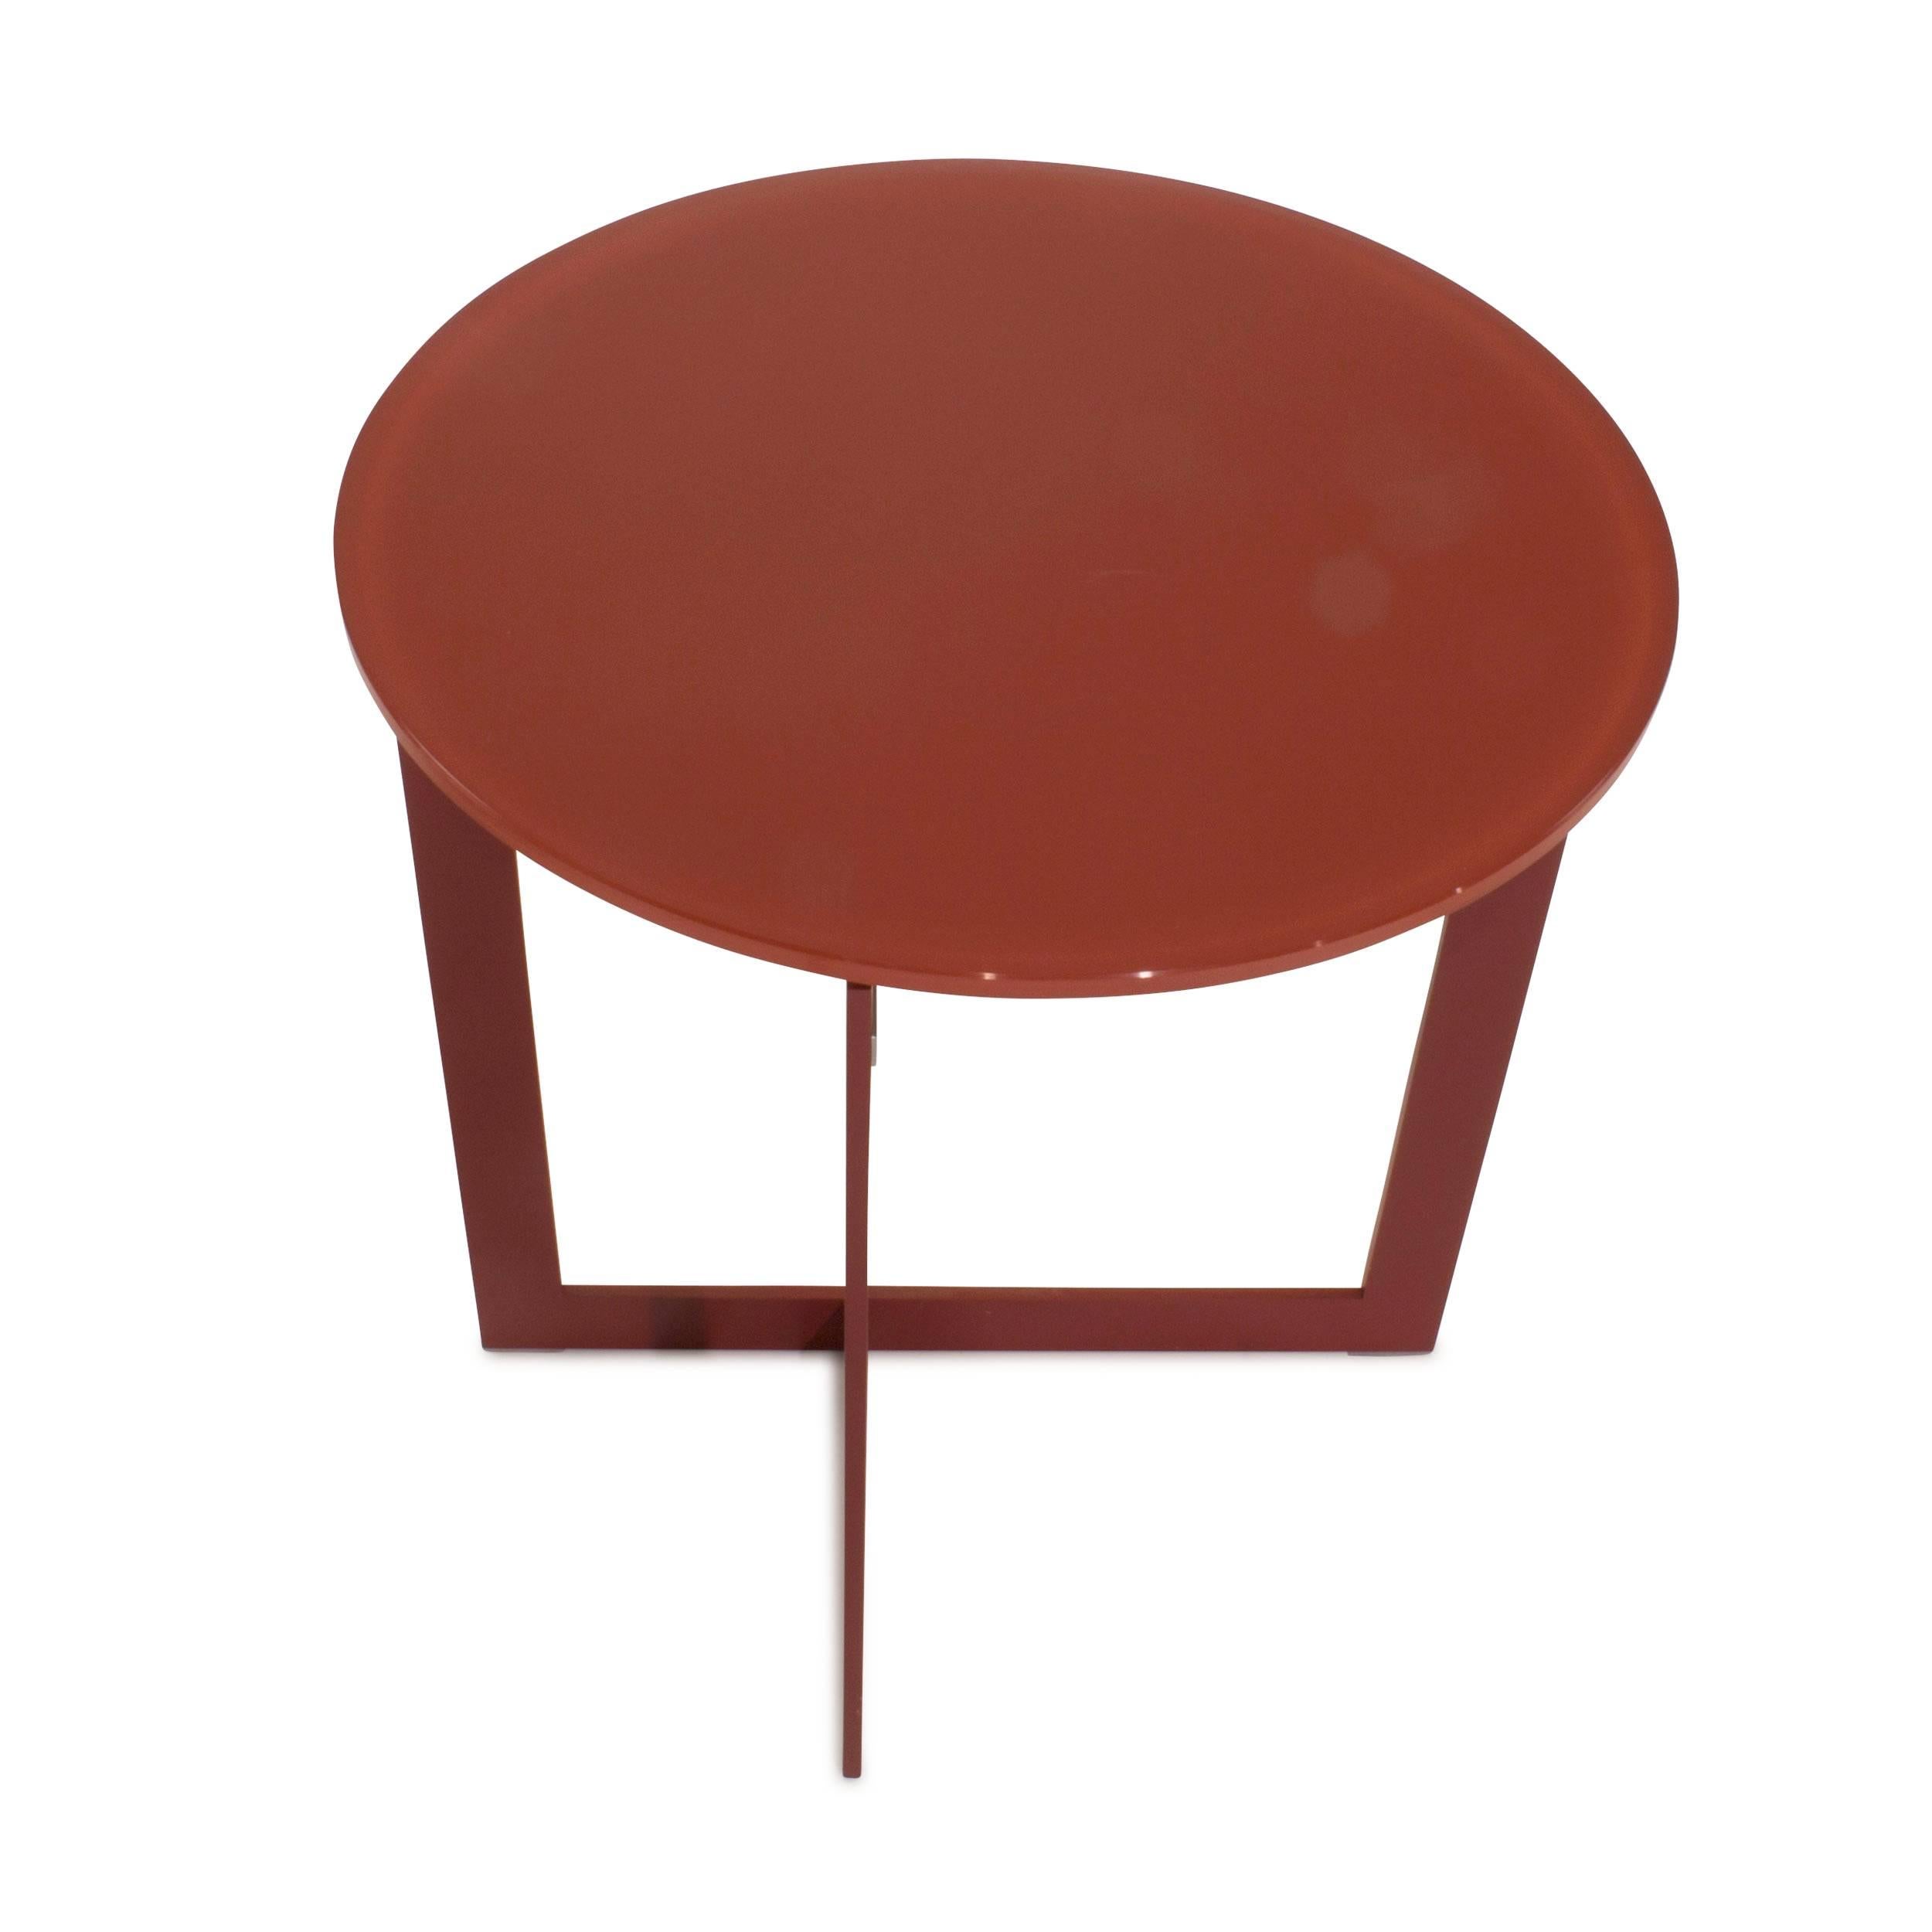 Ruby Red Domino Side Table by Nicola Gallizia for Molteni, Italy In Good Condition For Sale In Brooklyn, NY